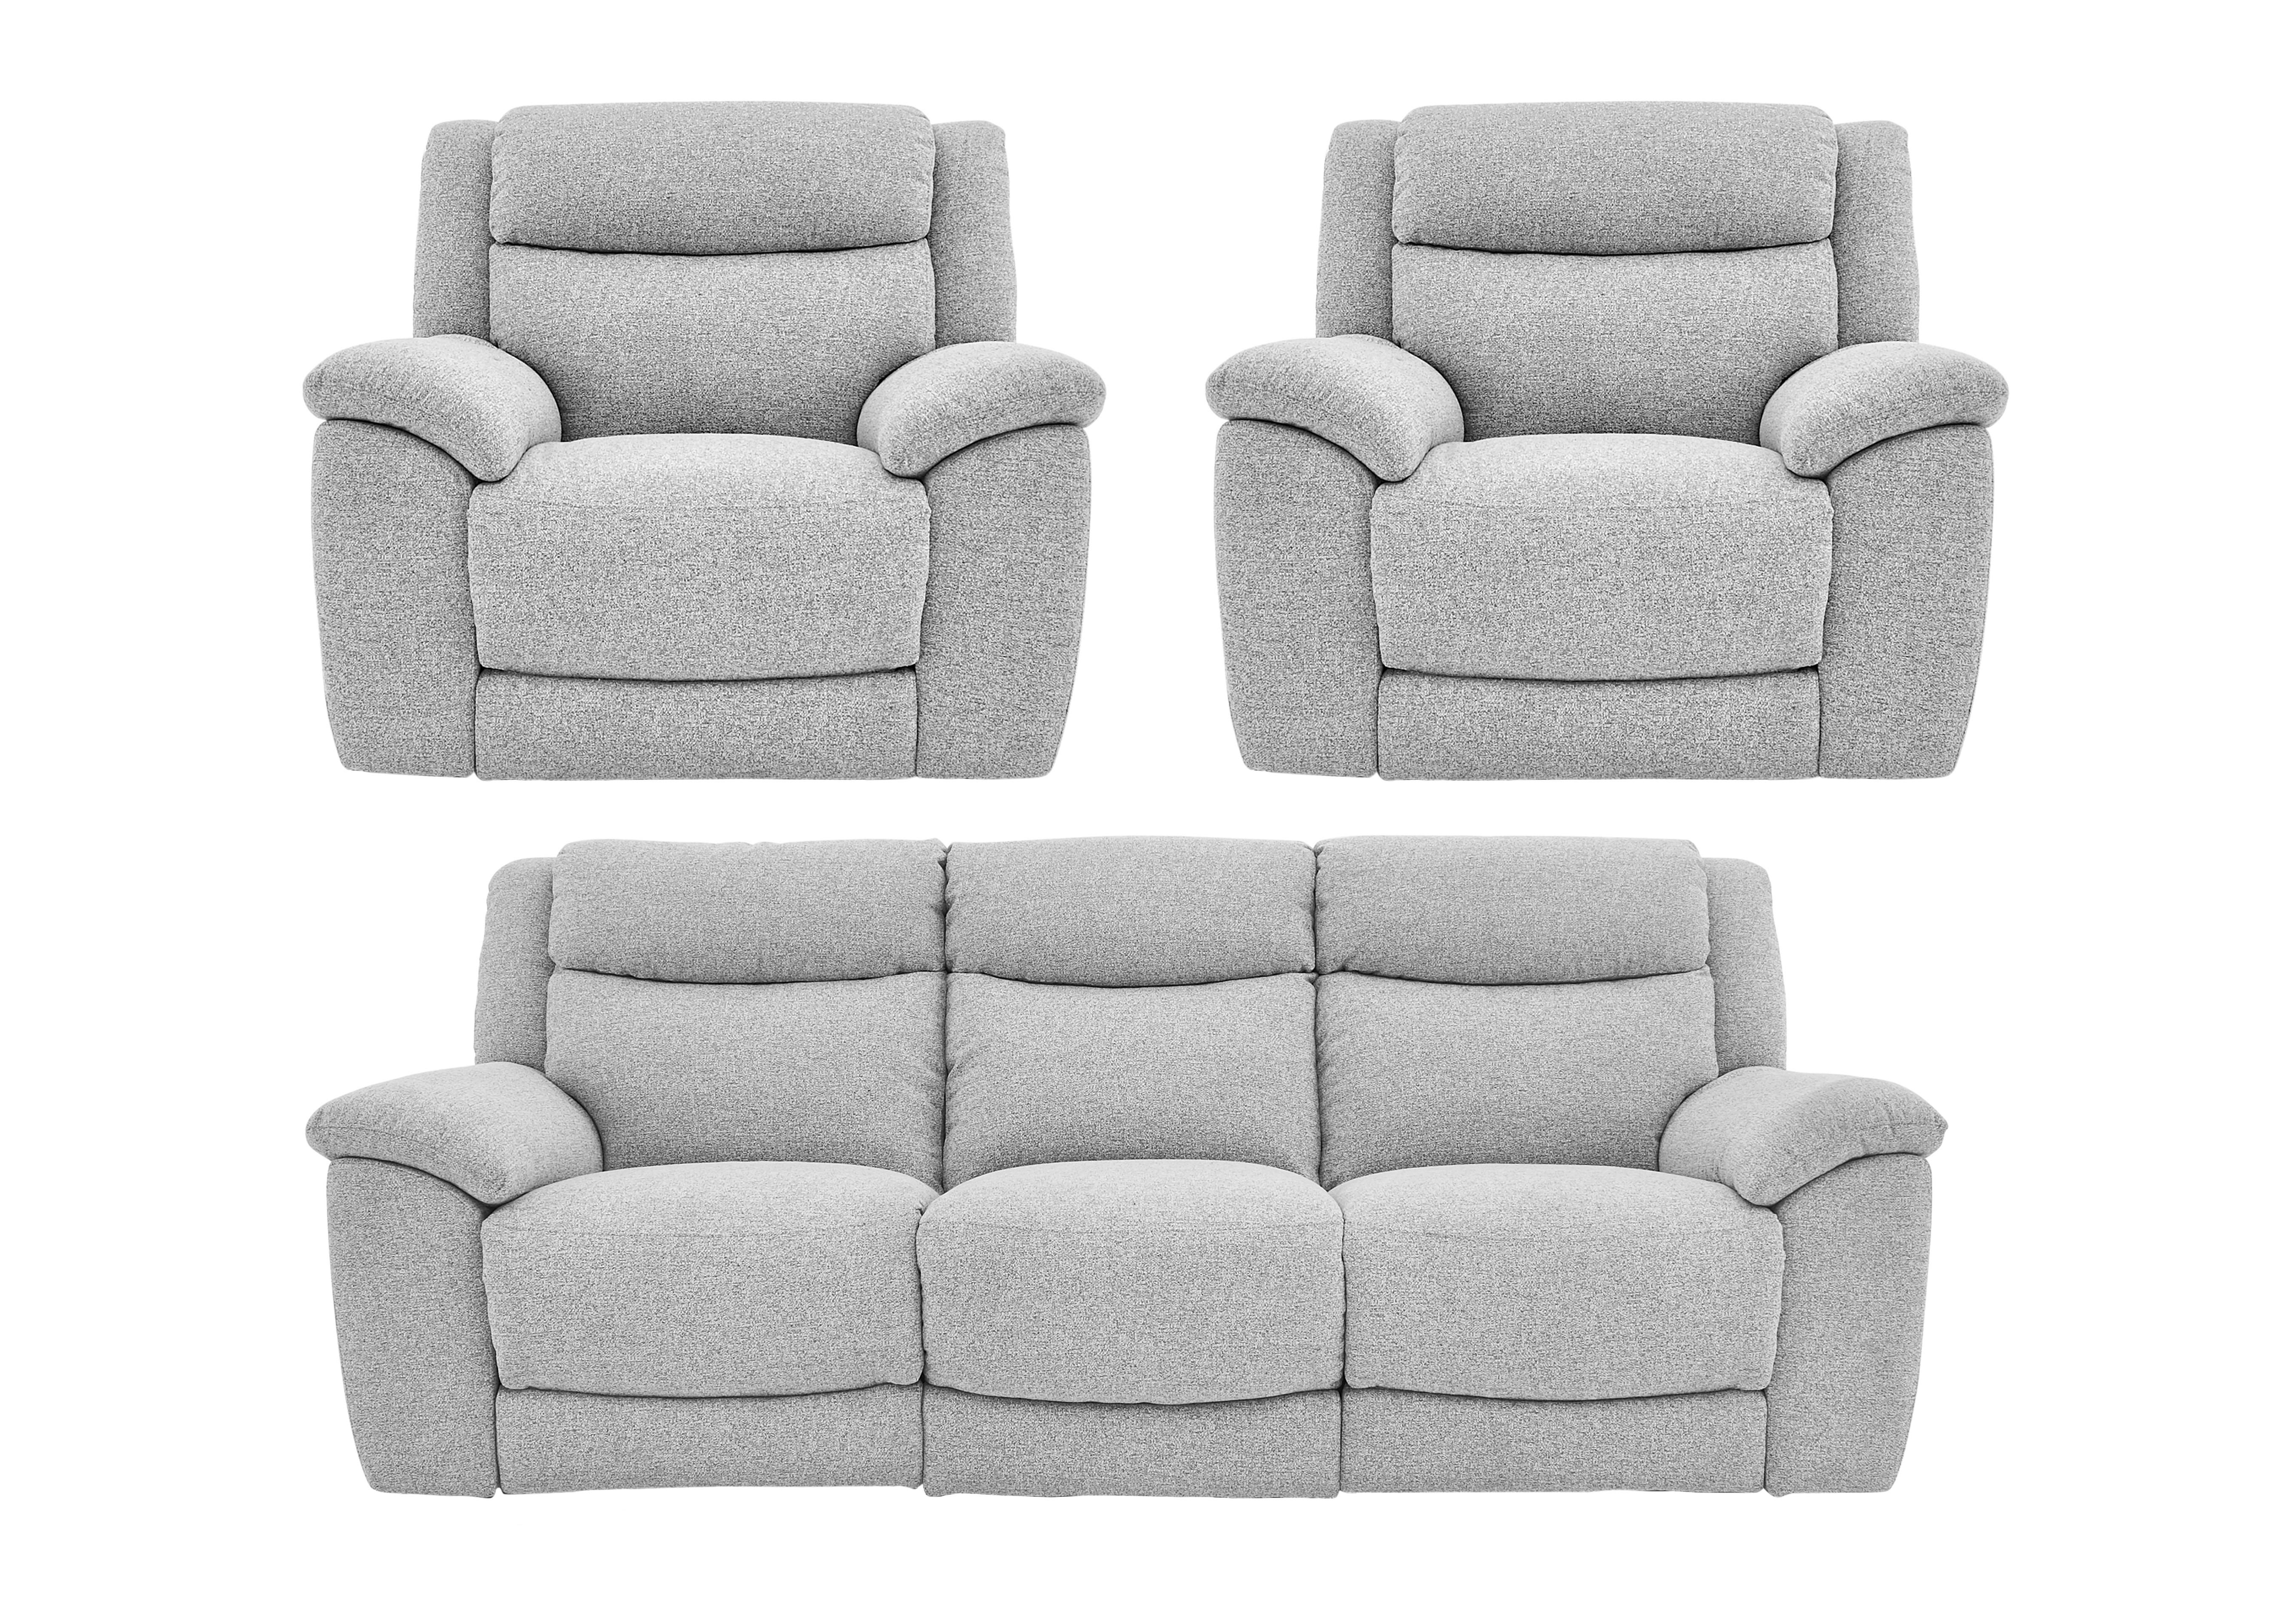 Bounce Fabric 3 Seater Manual Recliner Sofa and Armchairs ...